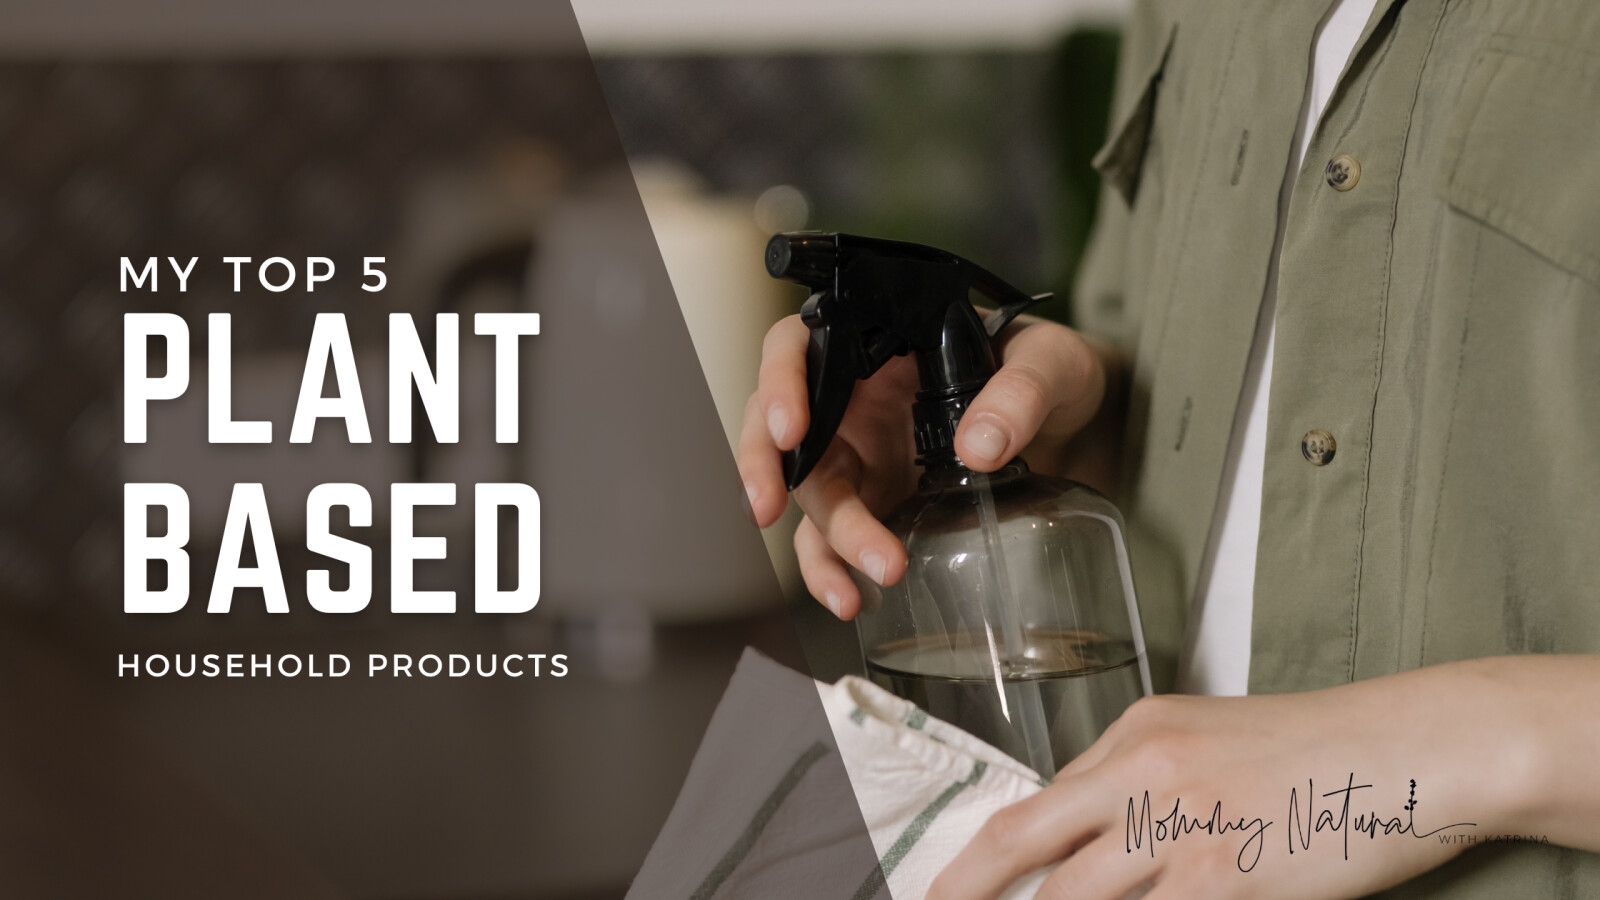 My Top 5 Plant Based Household Products